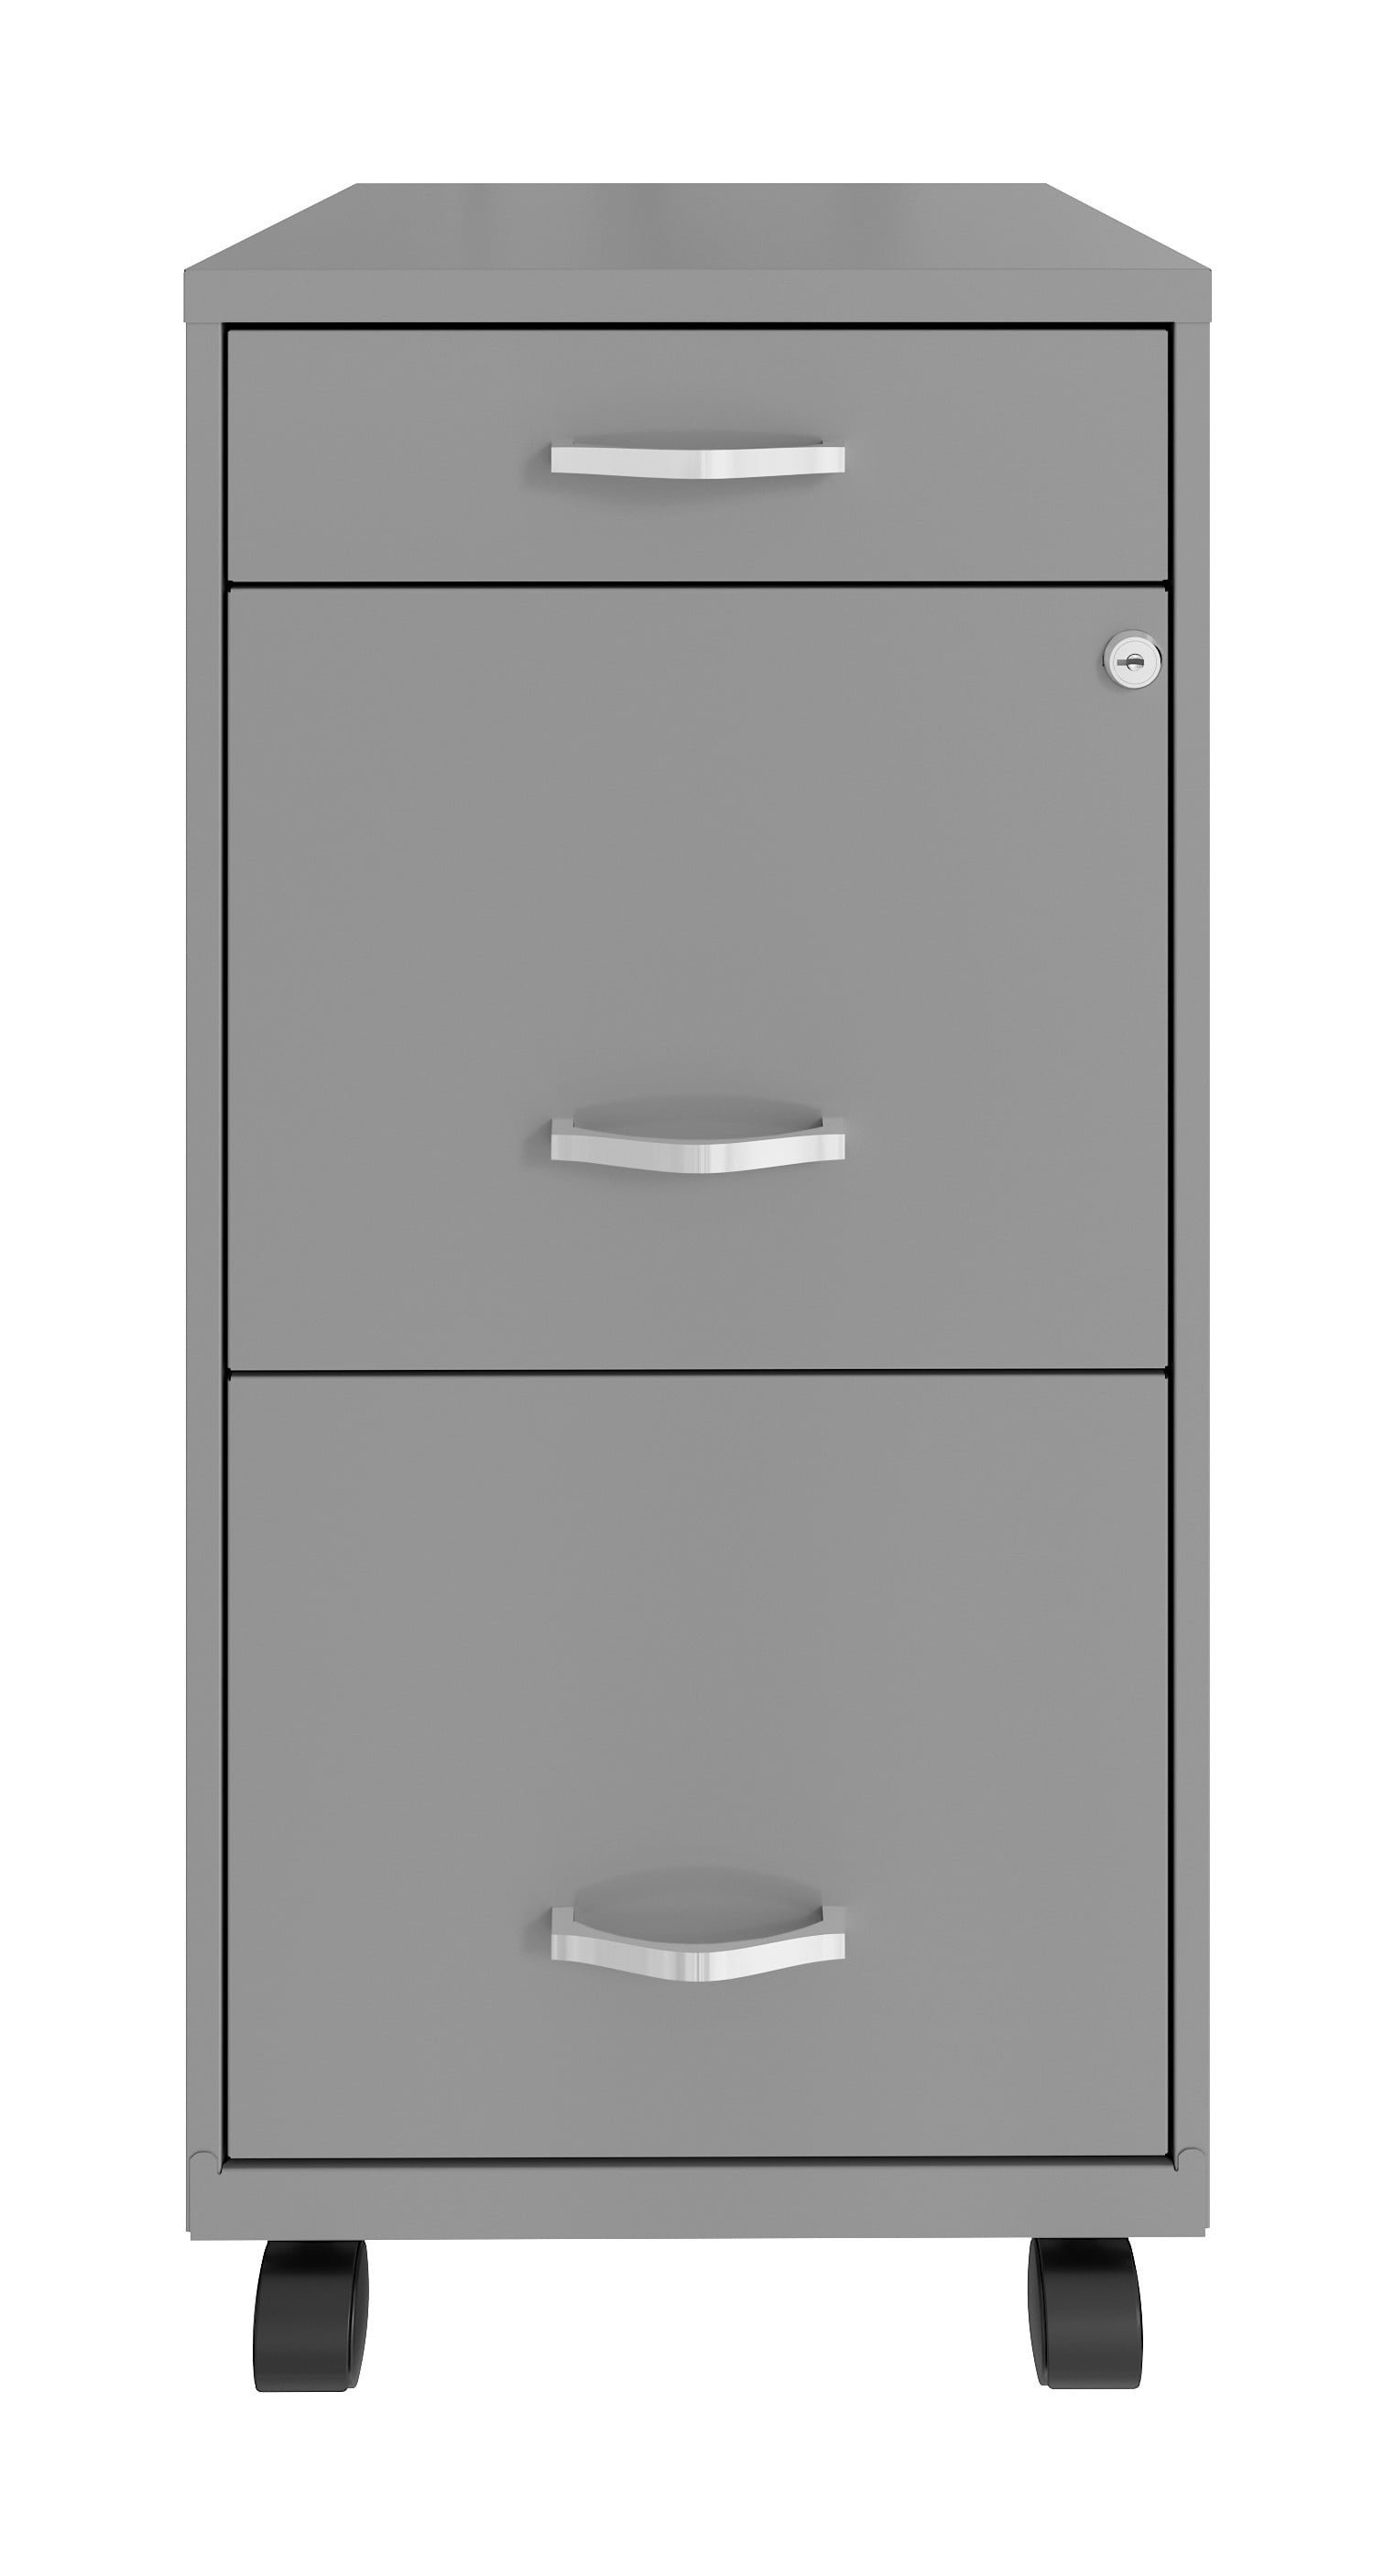 Hirsh Industries Space Solutions 18in Deep 3 Drawer Metal File Cabinet Arctic Silver Fully Assembled Letter Size 